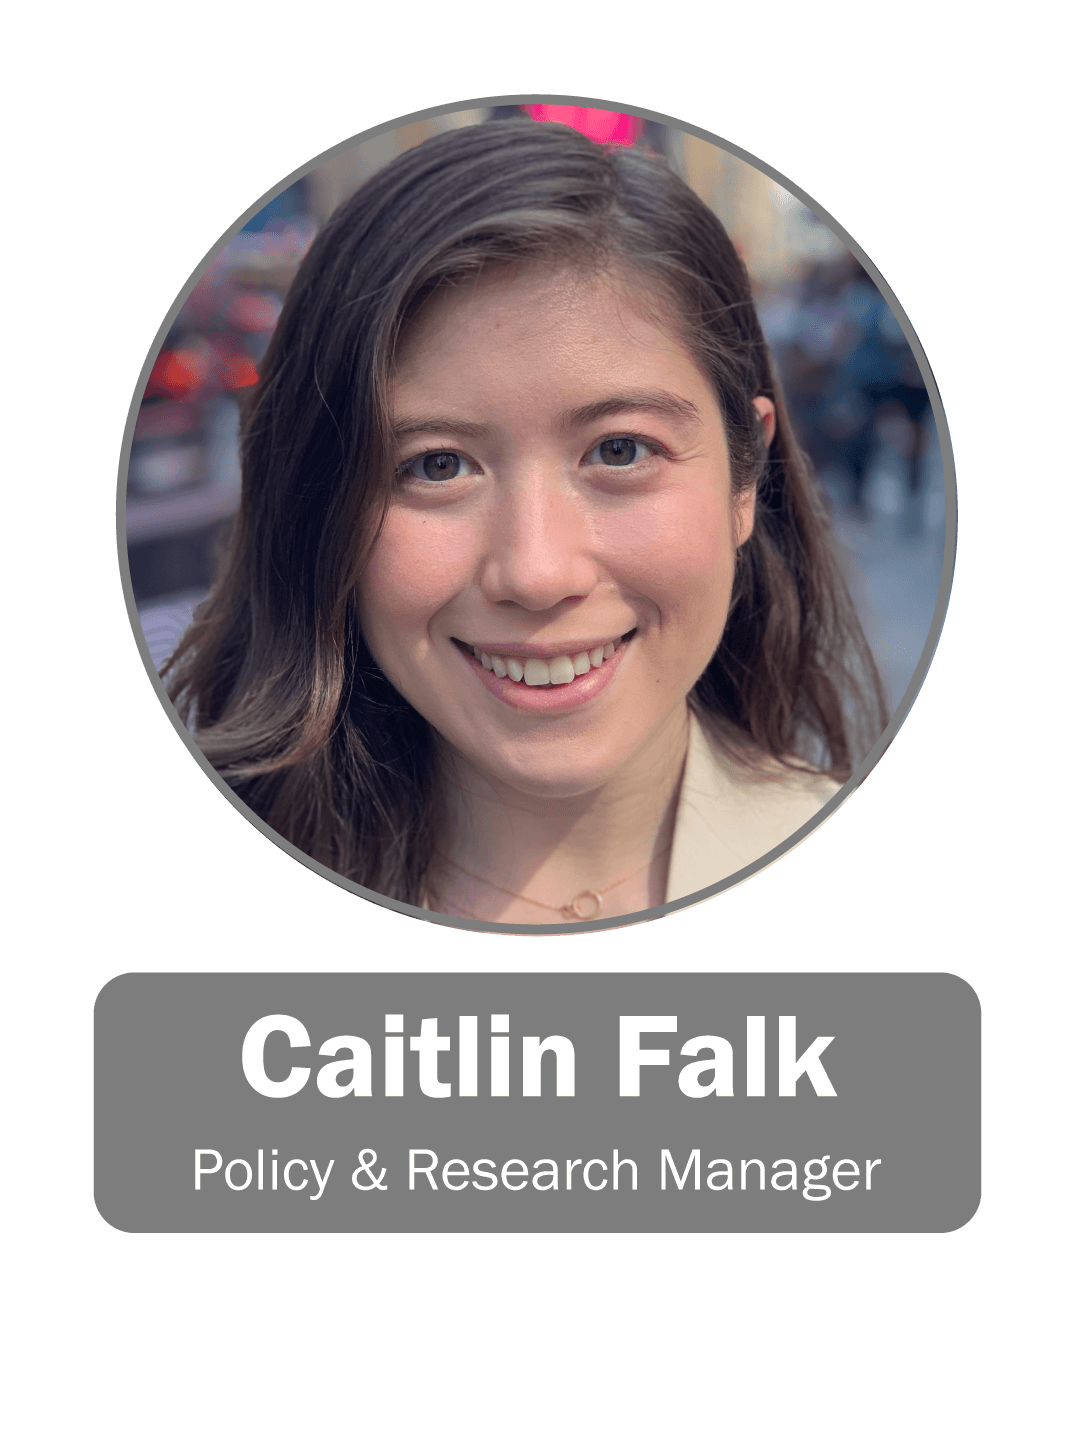 Caitlin Falk | Policy & Research Manager